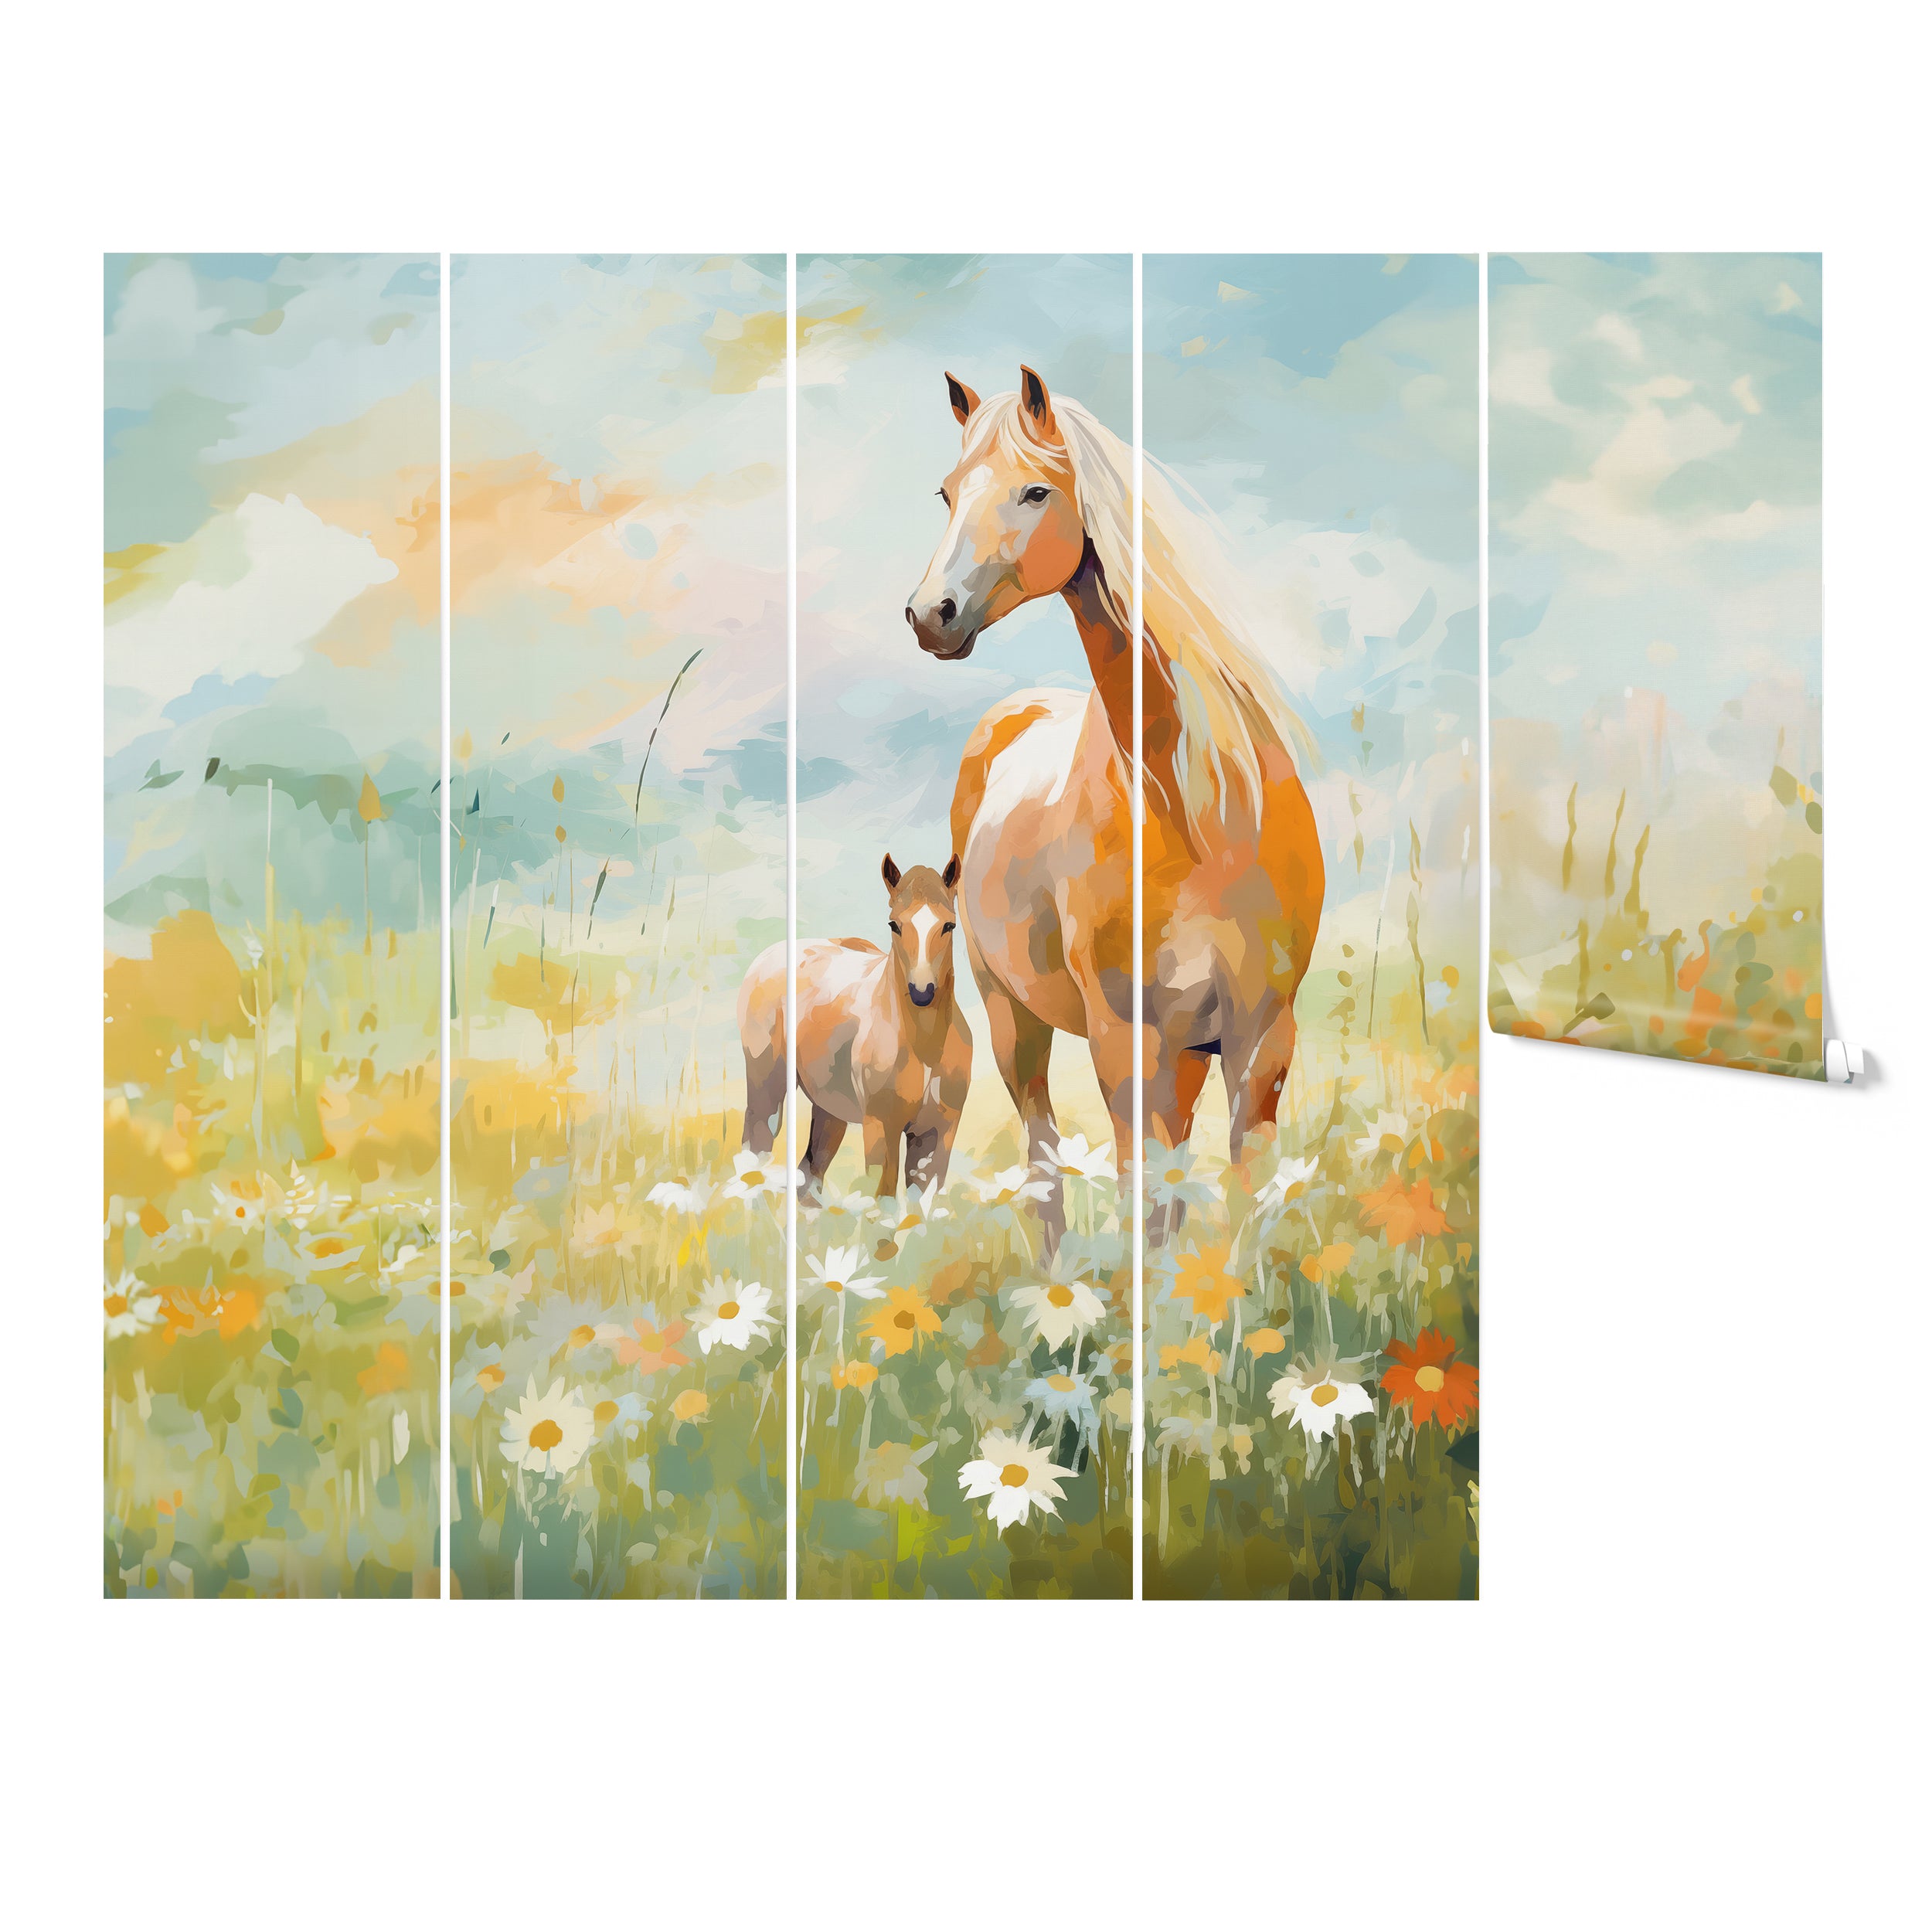 "A decorative five-panel wall art of a mother horse and foal in a colorful meadow, divided into vertical panels, adding a modern artistic touch to the classic scene.